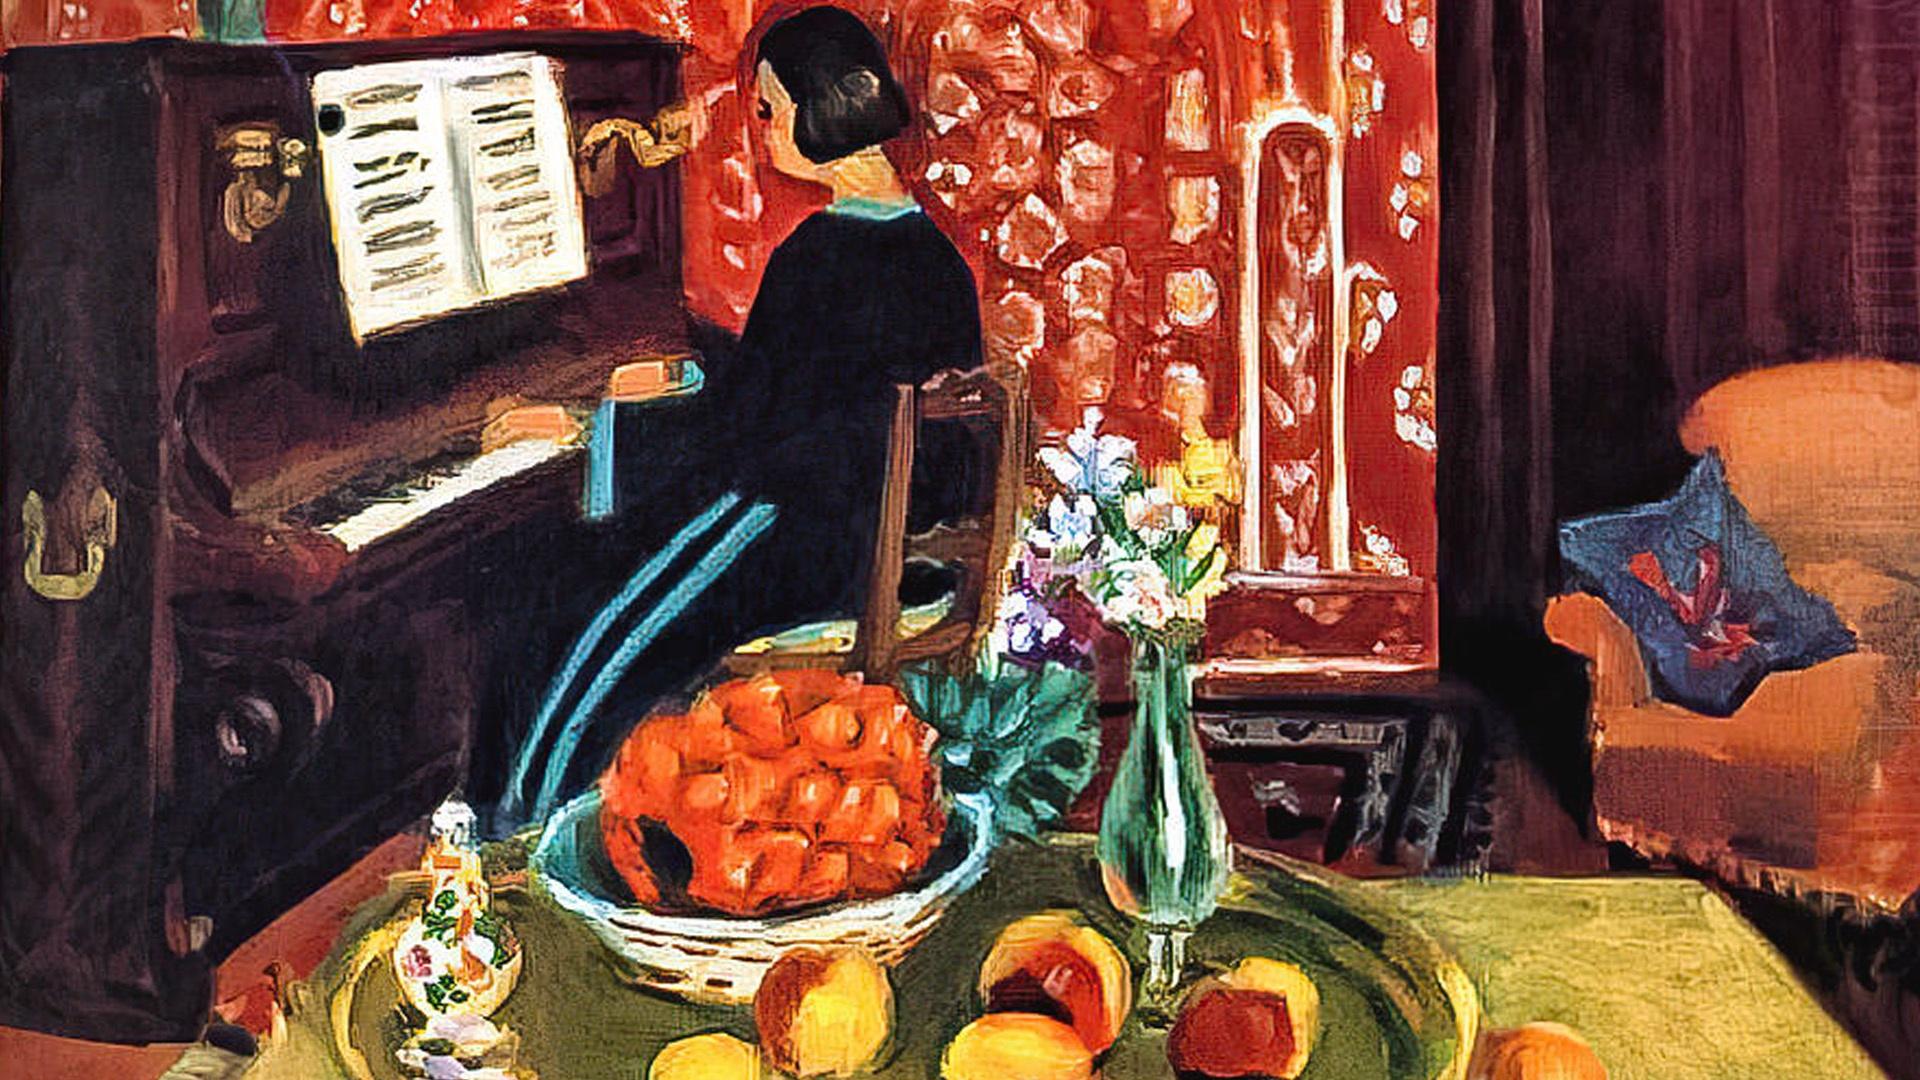 Piano Player and Still Life painting by Henri Matisse